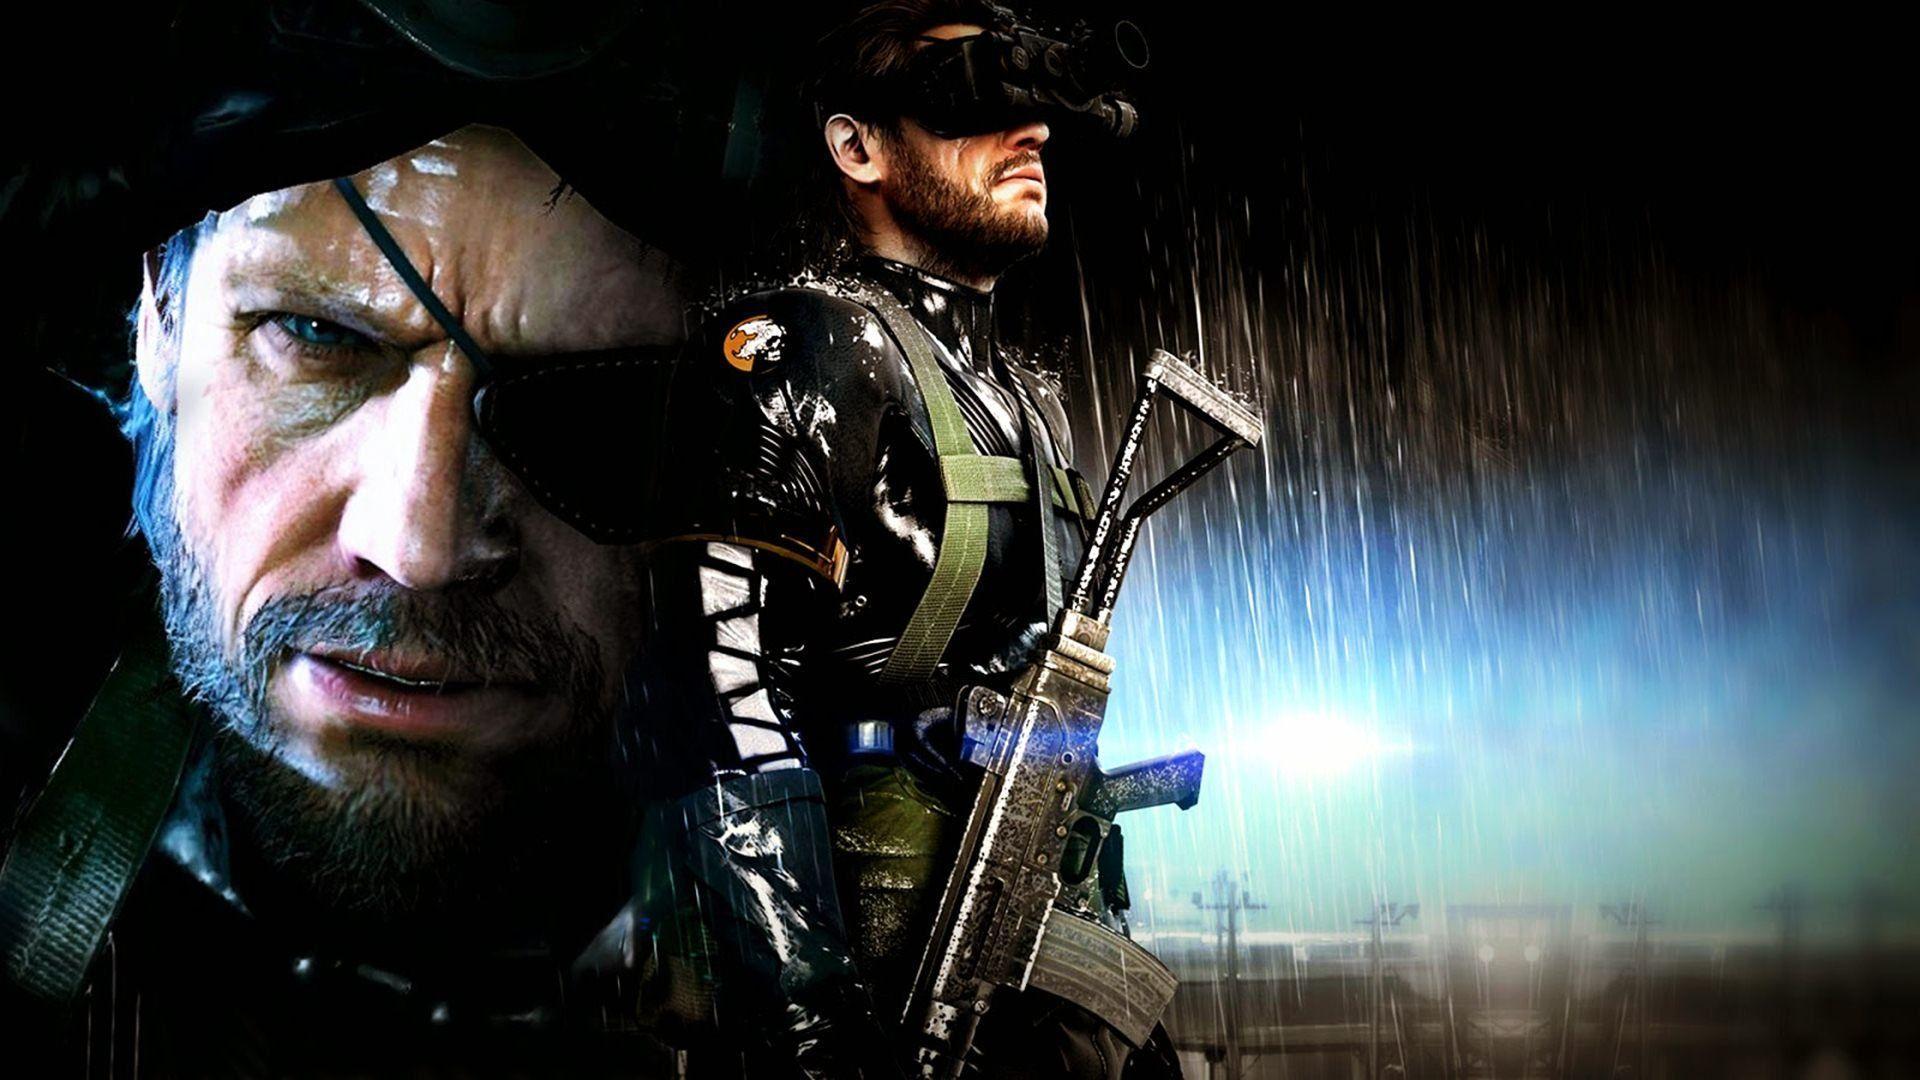 METAL GEAR SOLID Phantom Pain shooter action adventure stealth 3